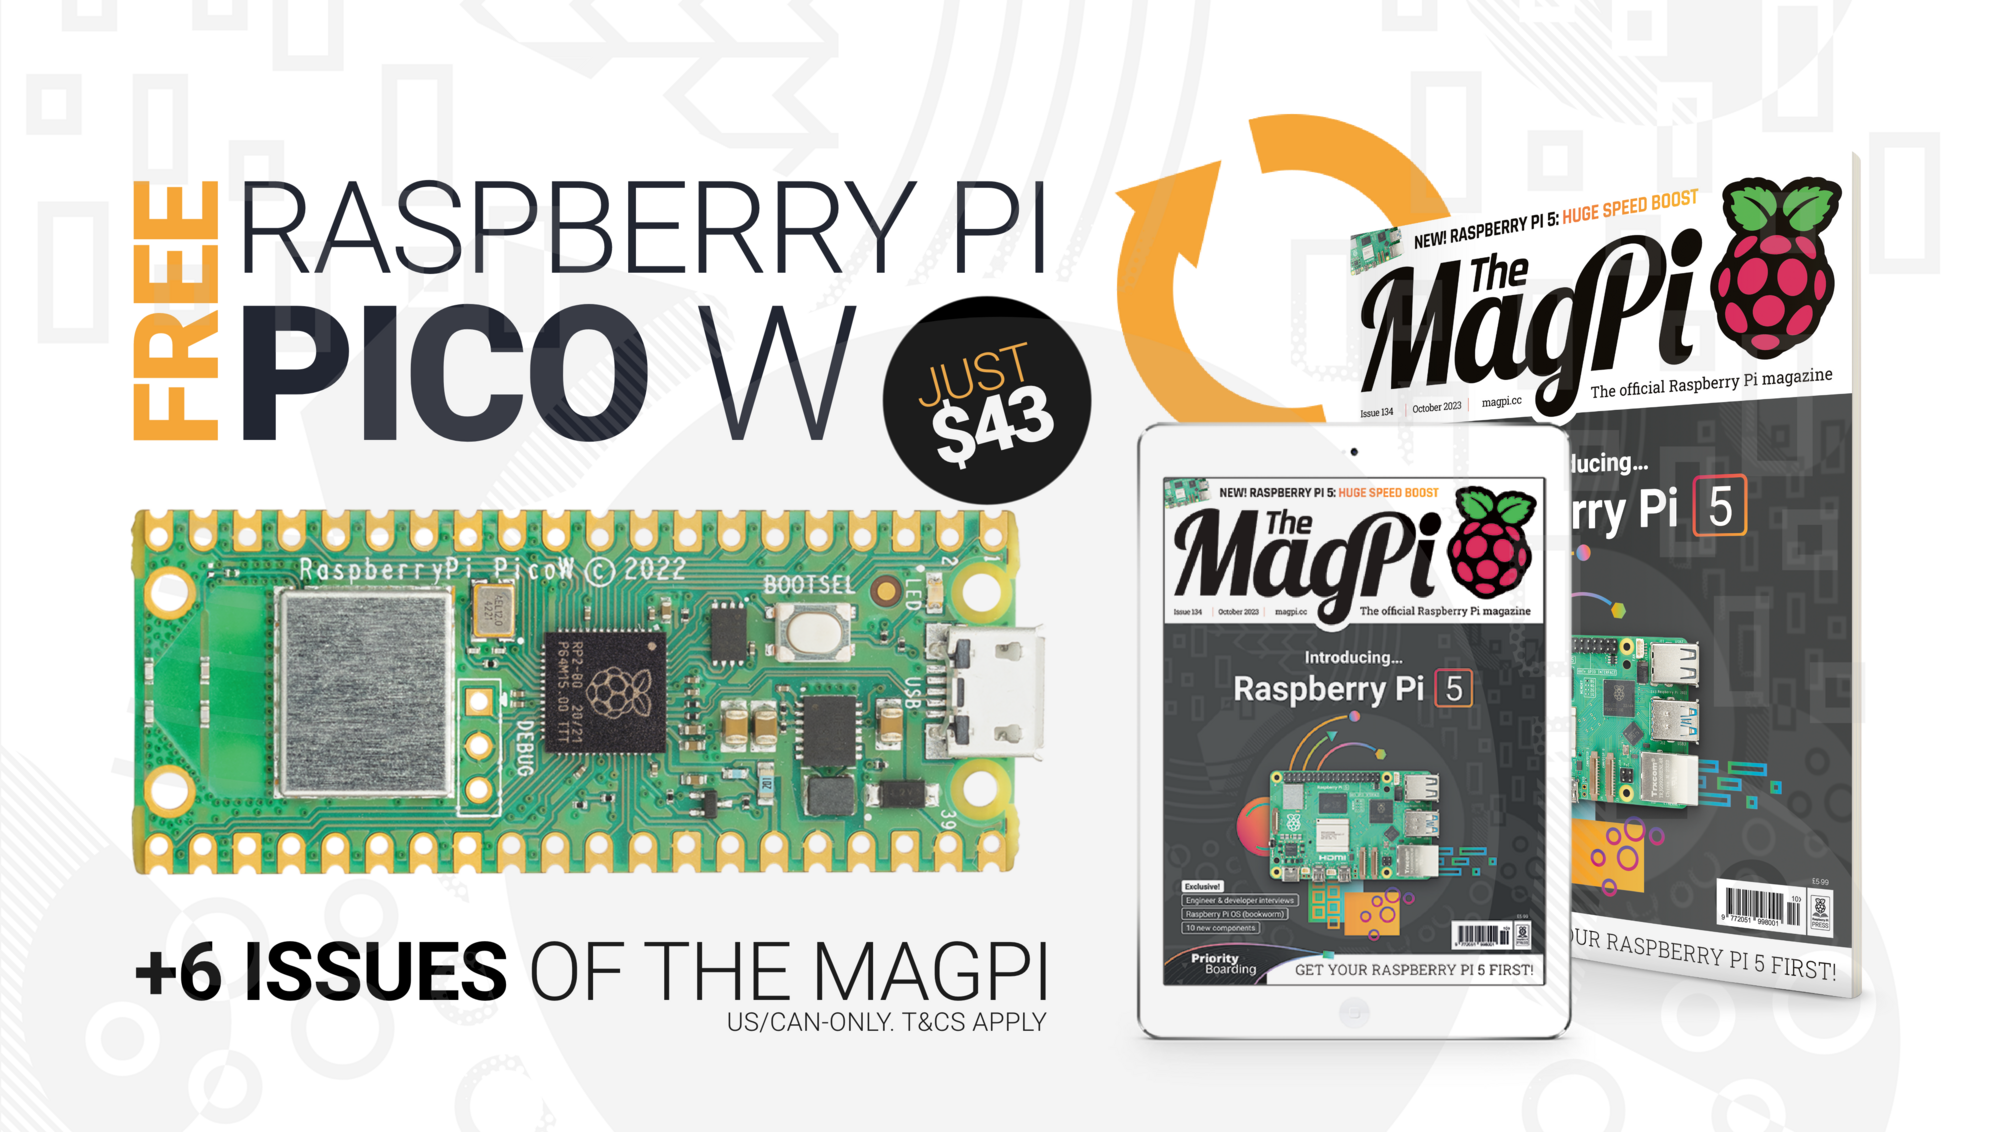 Subscribe to The MagPi magazine